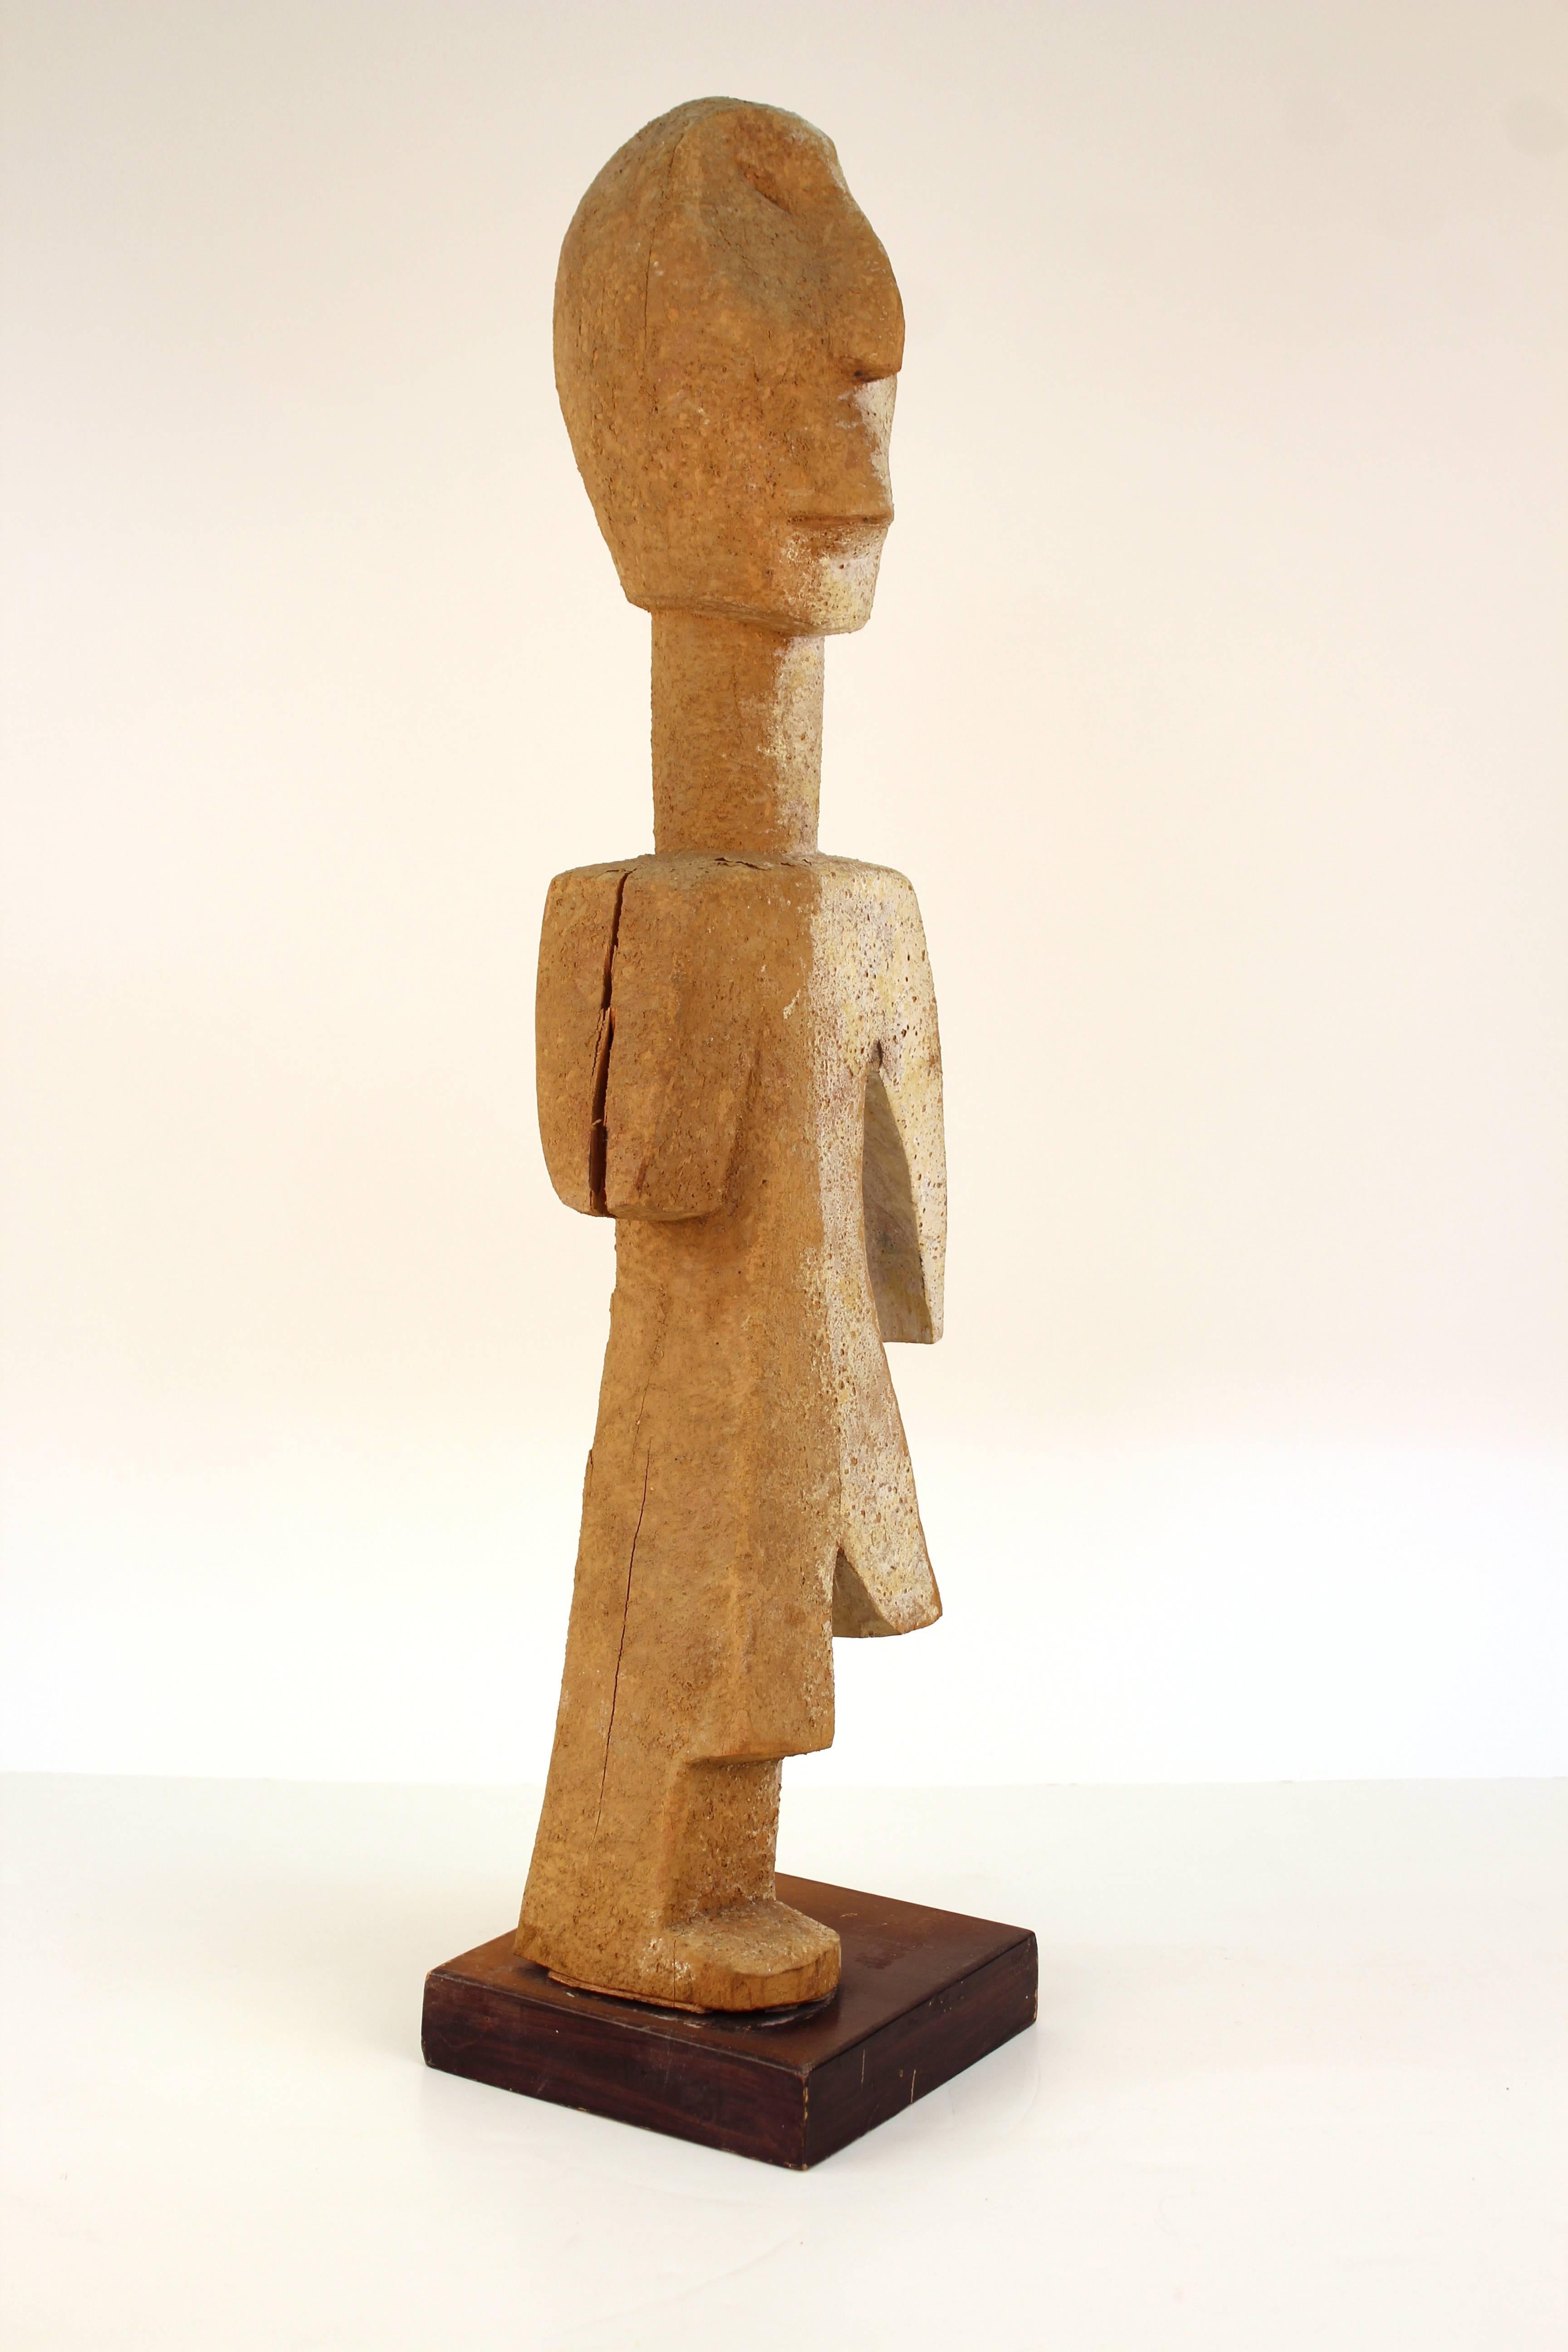 Figural sculpture on a dark wooden stand. Depicts a person in abstract organic forms. One side without an arm and the other without a leg. wear appropriate to age and use the piece is in good condition. 